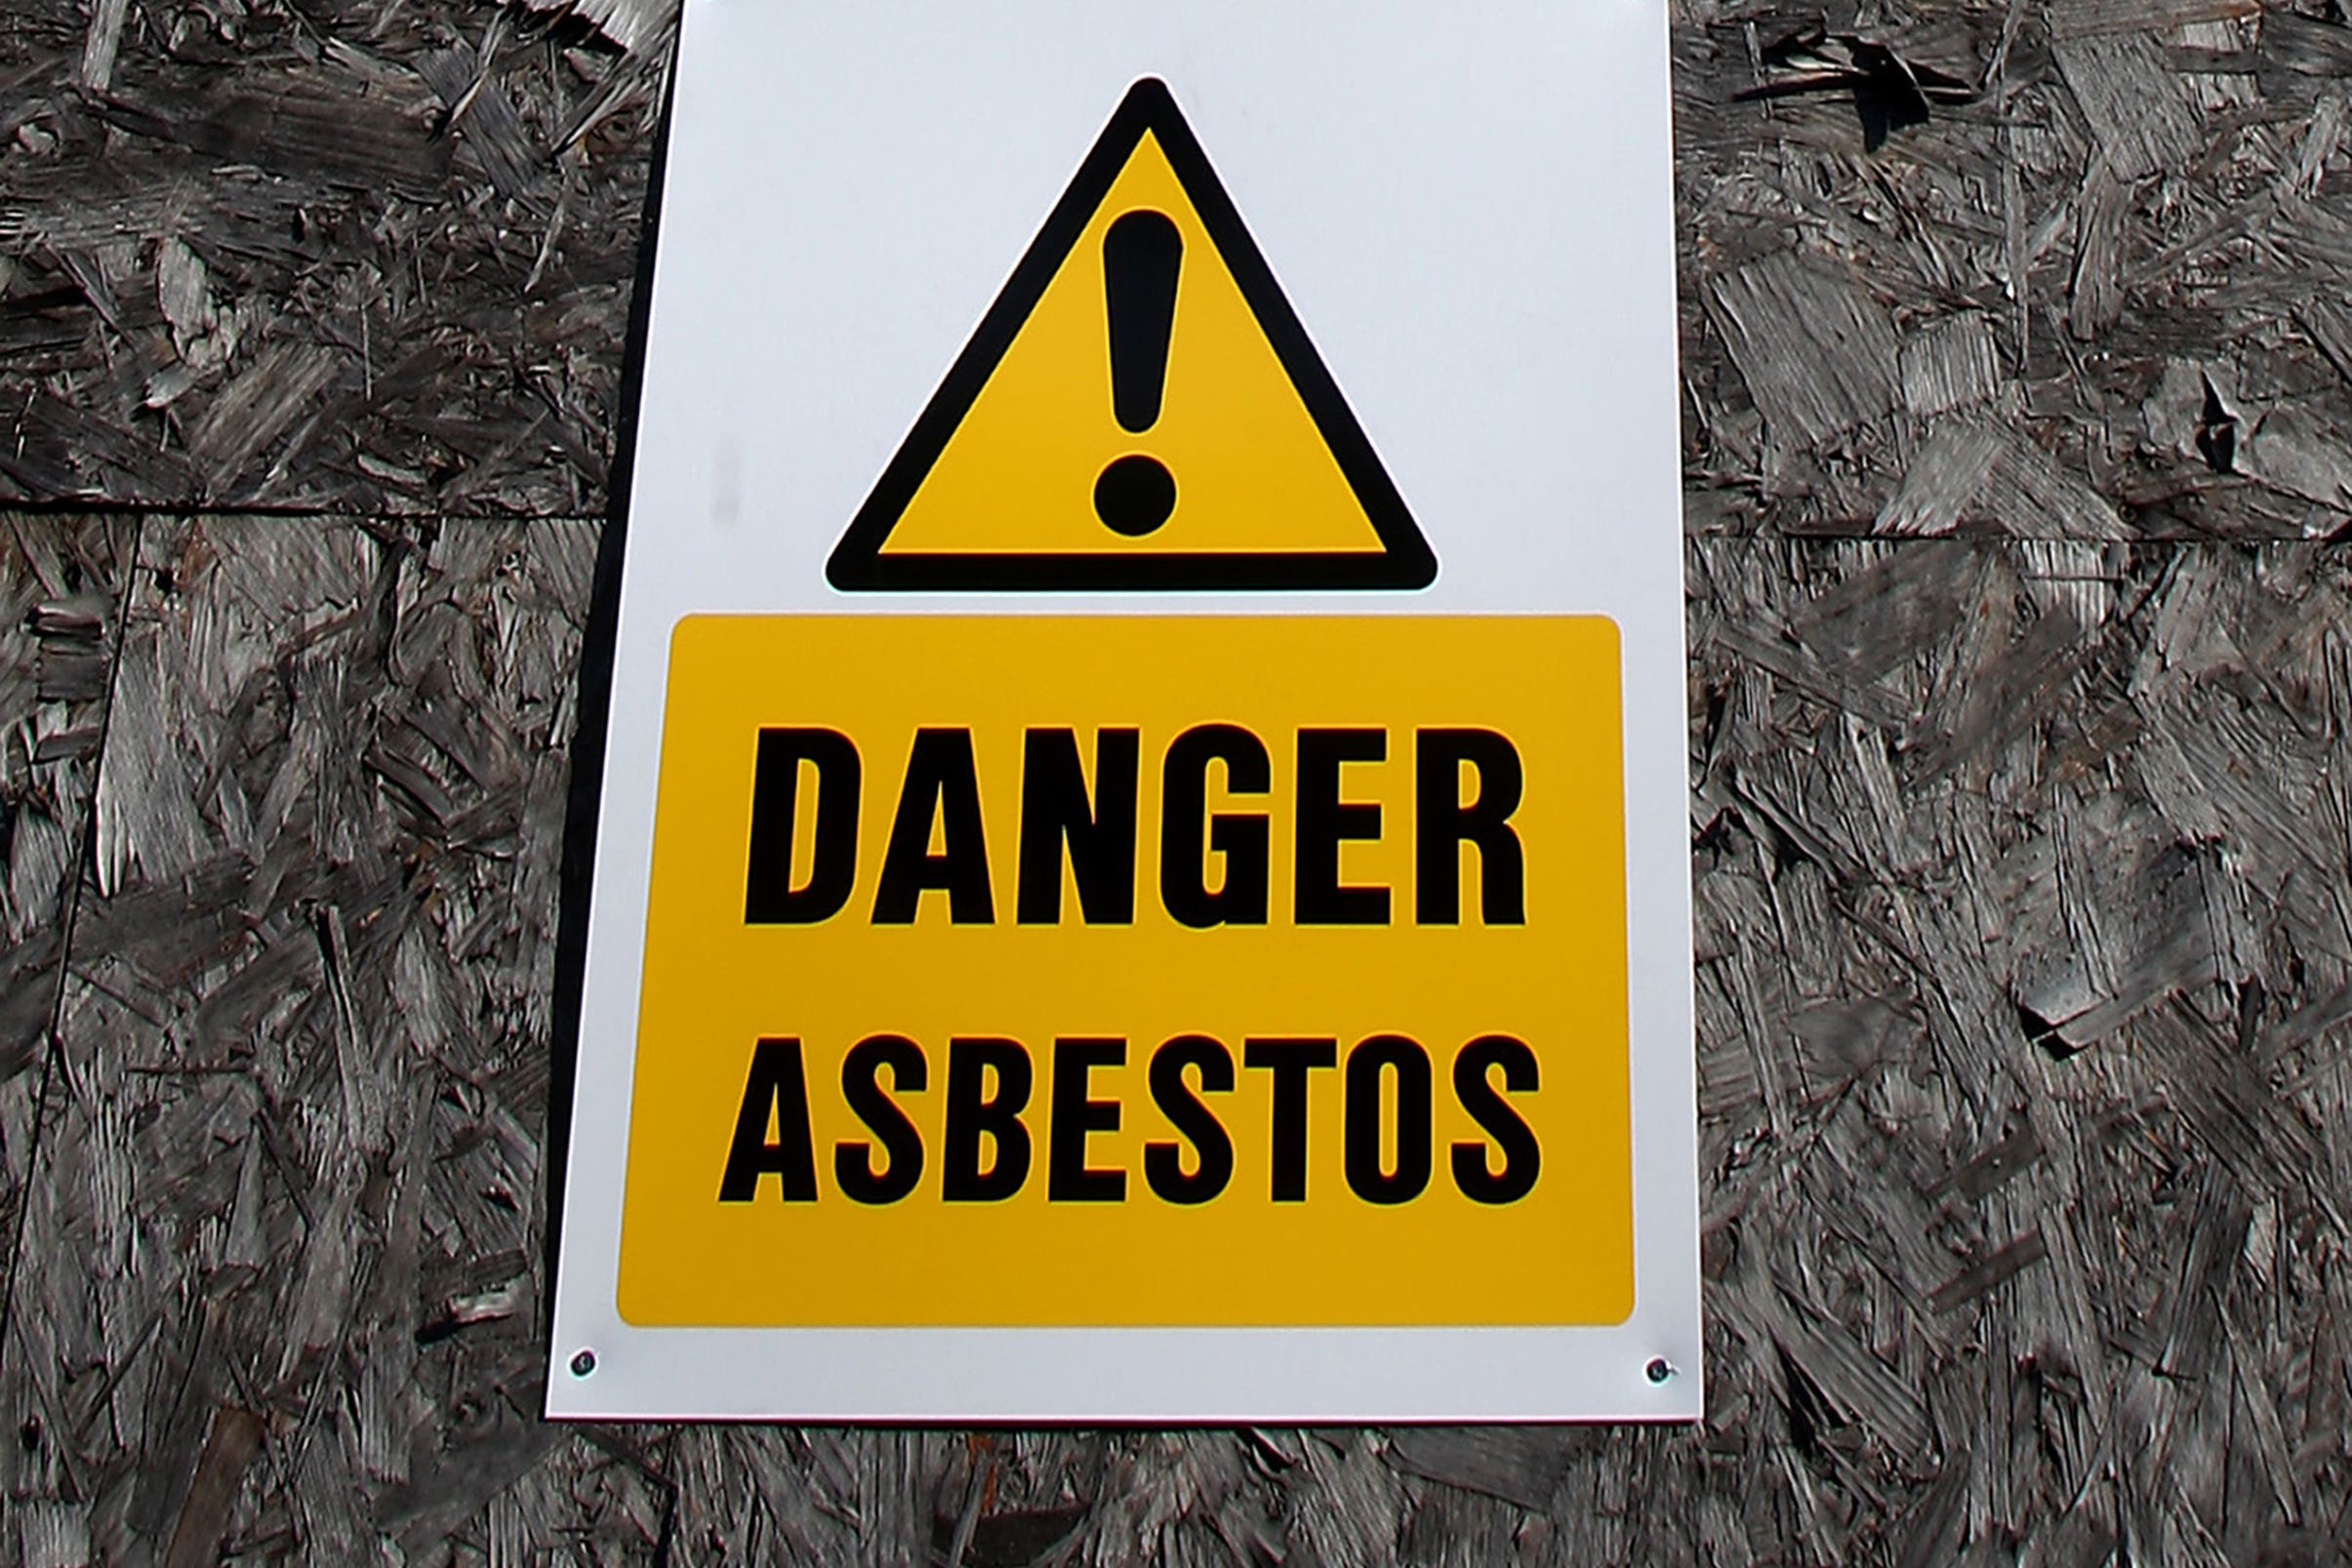 Researchers in Glasgow and Cambridge have been funded with £2.1m from Cancer Research UK to understand better the long gap between exposure to asbestos and a mesothelioma diagnosis (Stephen Pond/PA)